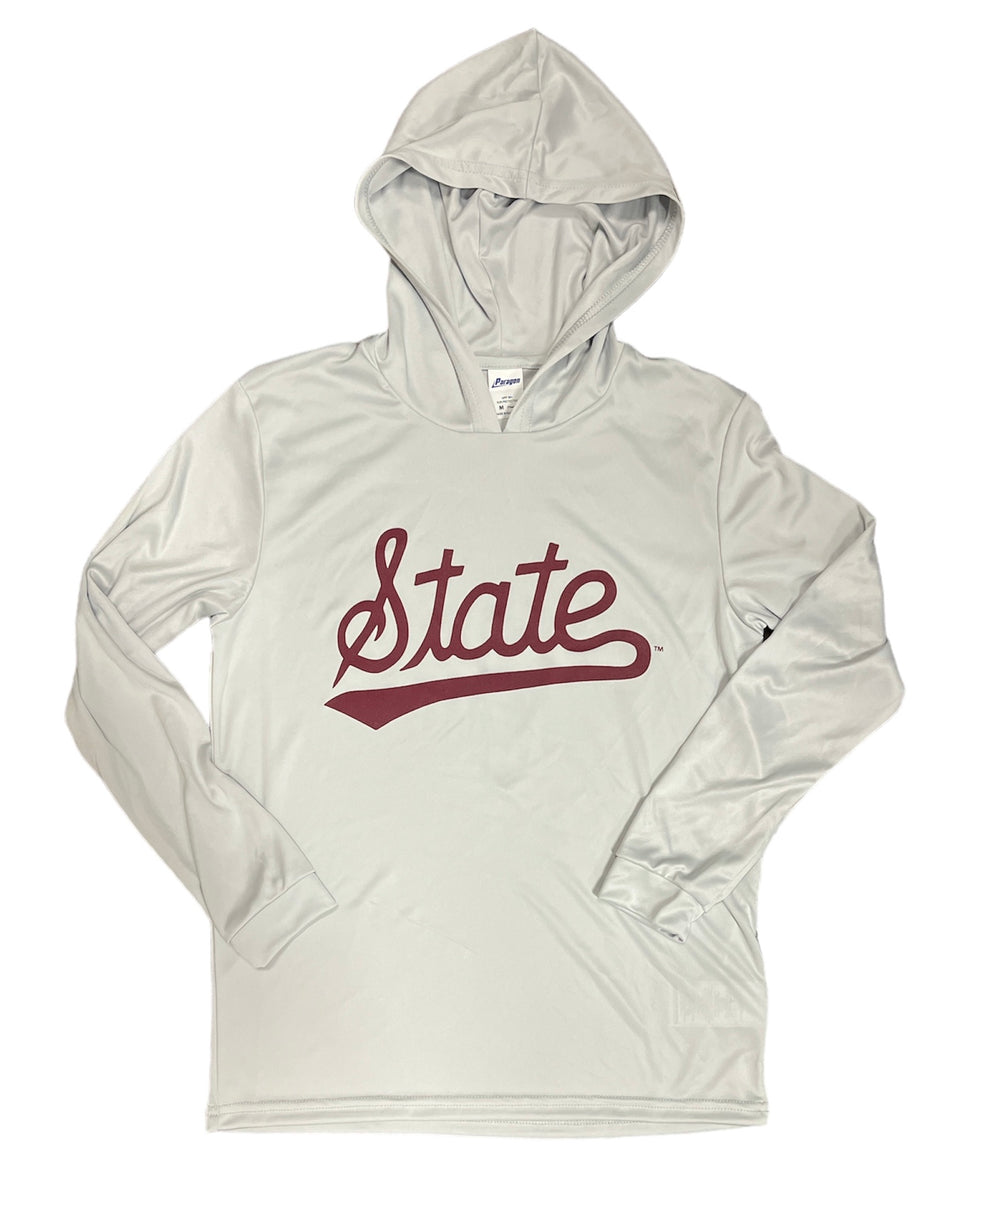 Grey Youth State Dri Fit T-Shirt Hoodie